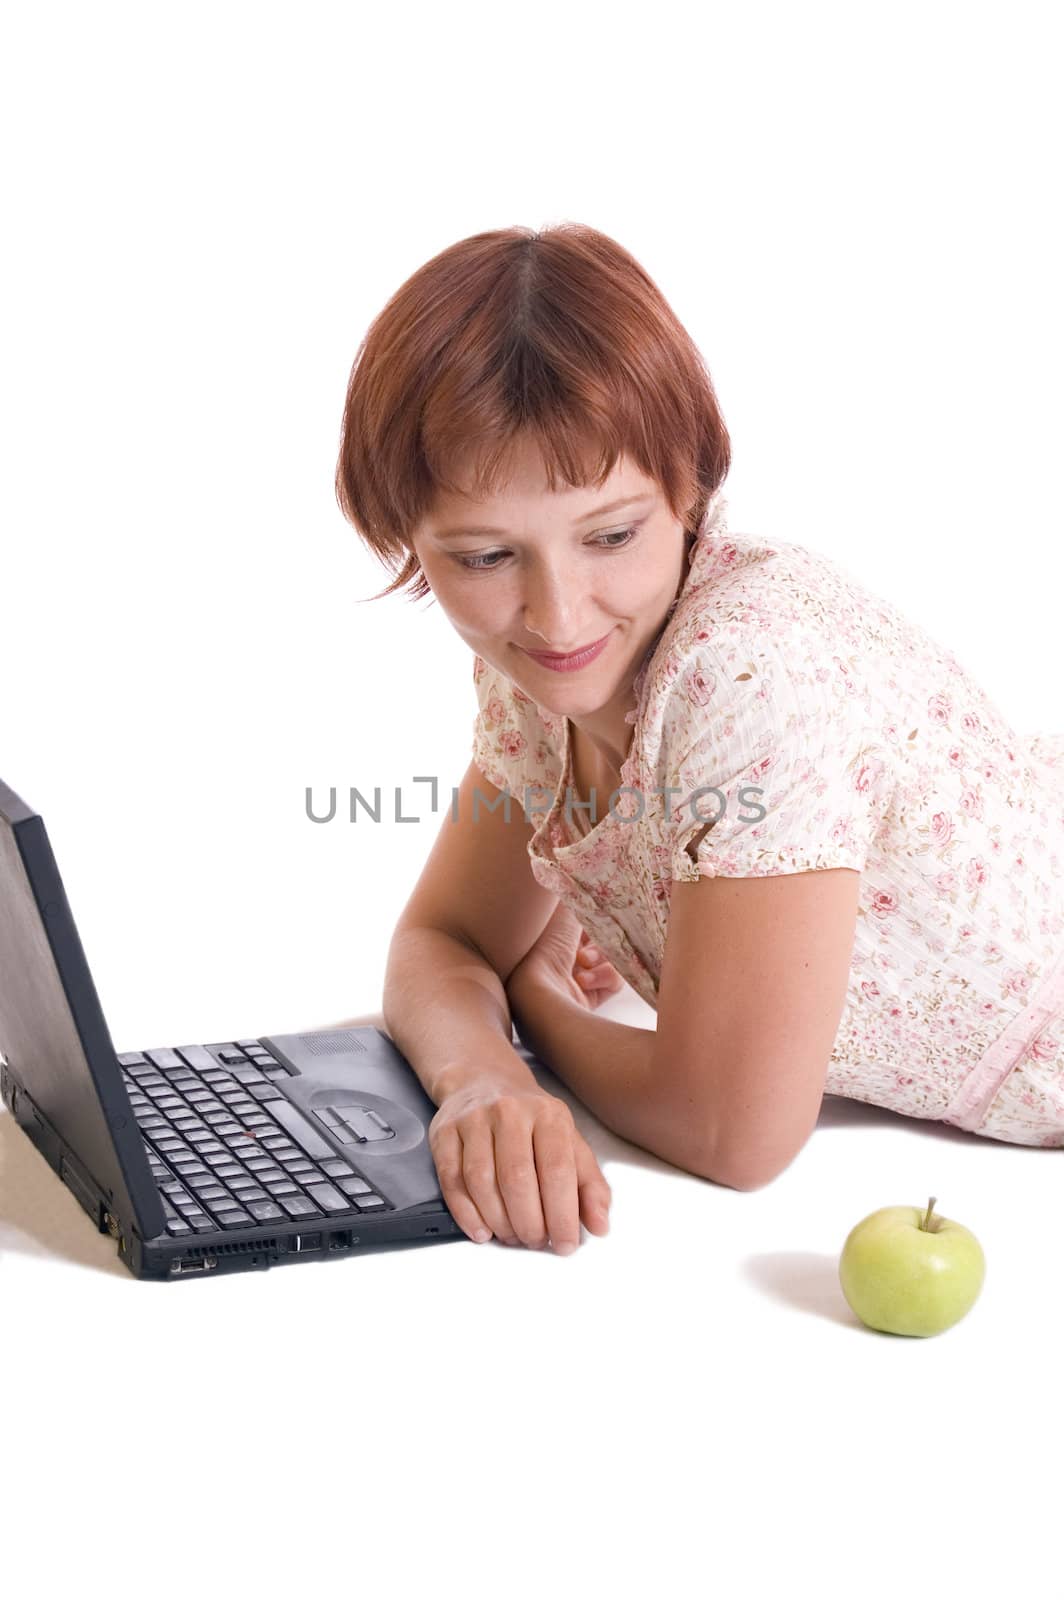 Beautiful romantic girl between a computer and an apple. by shalunishka